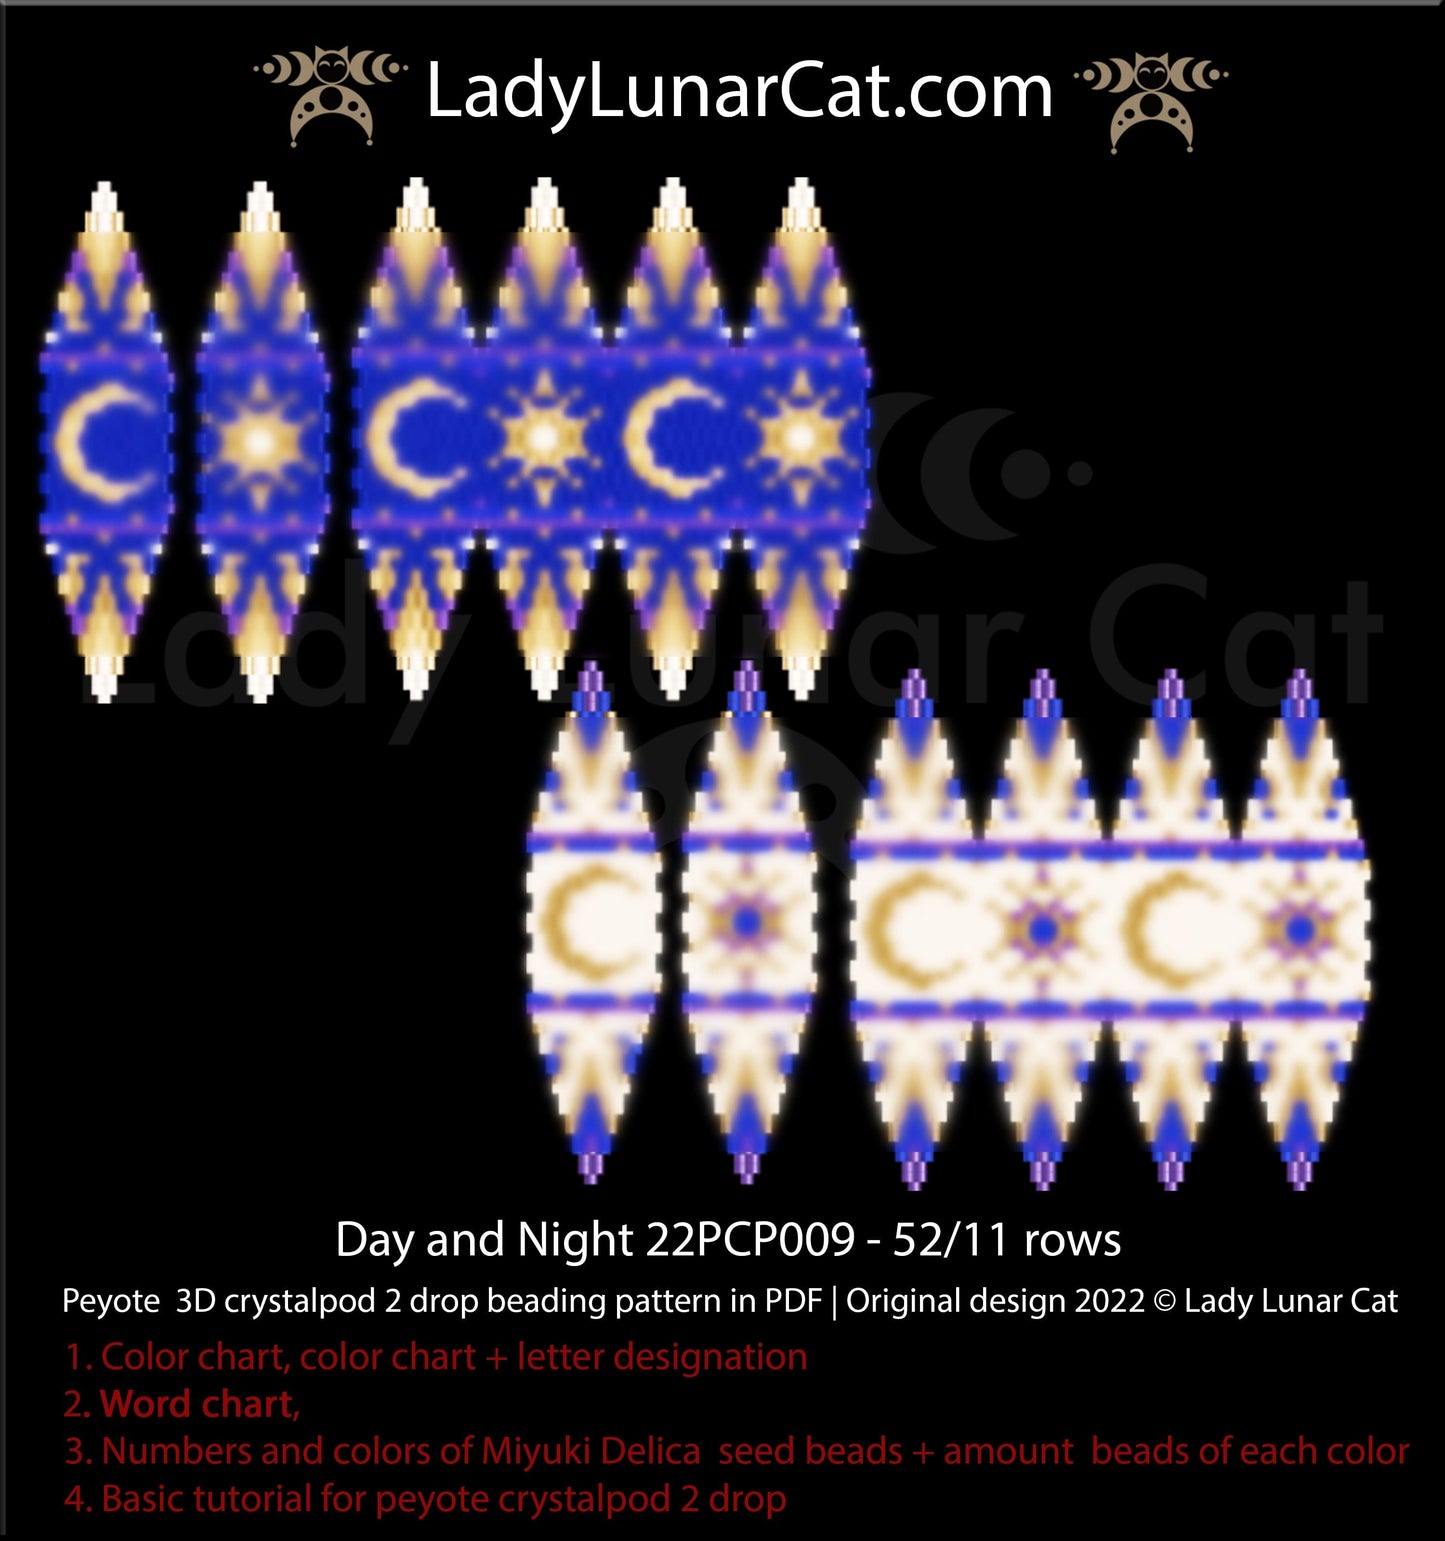 Peyote 2drop pod pattern or crystalpod pattern for beading Day and Night 22PCP009 LadyLunarCat